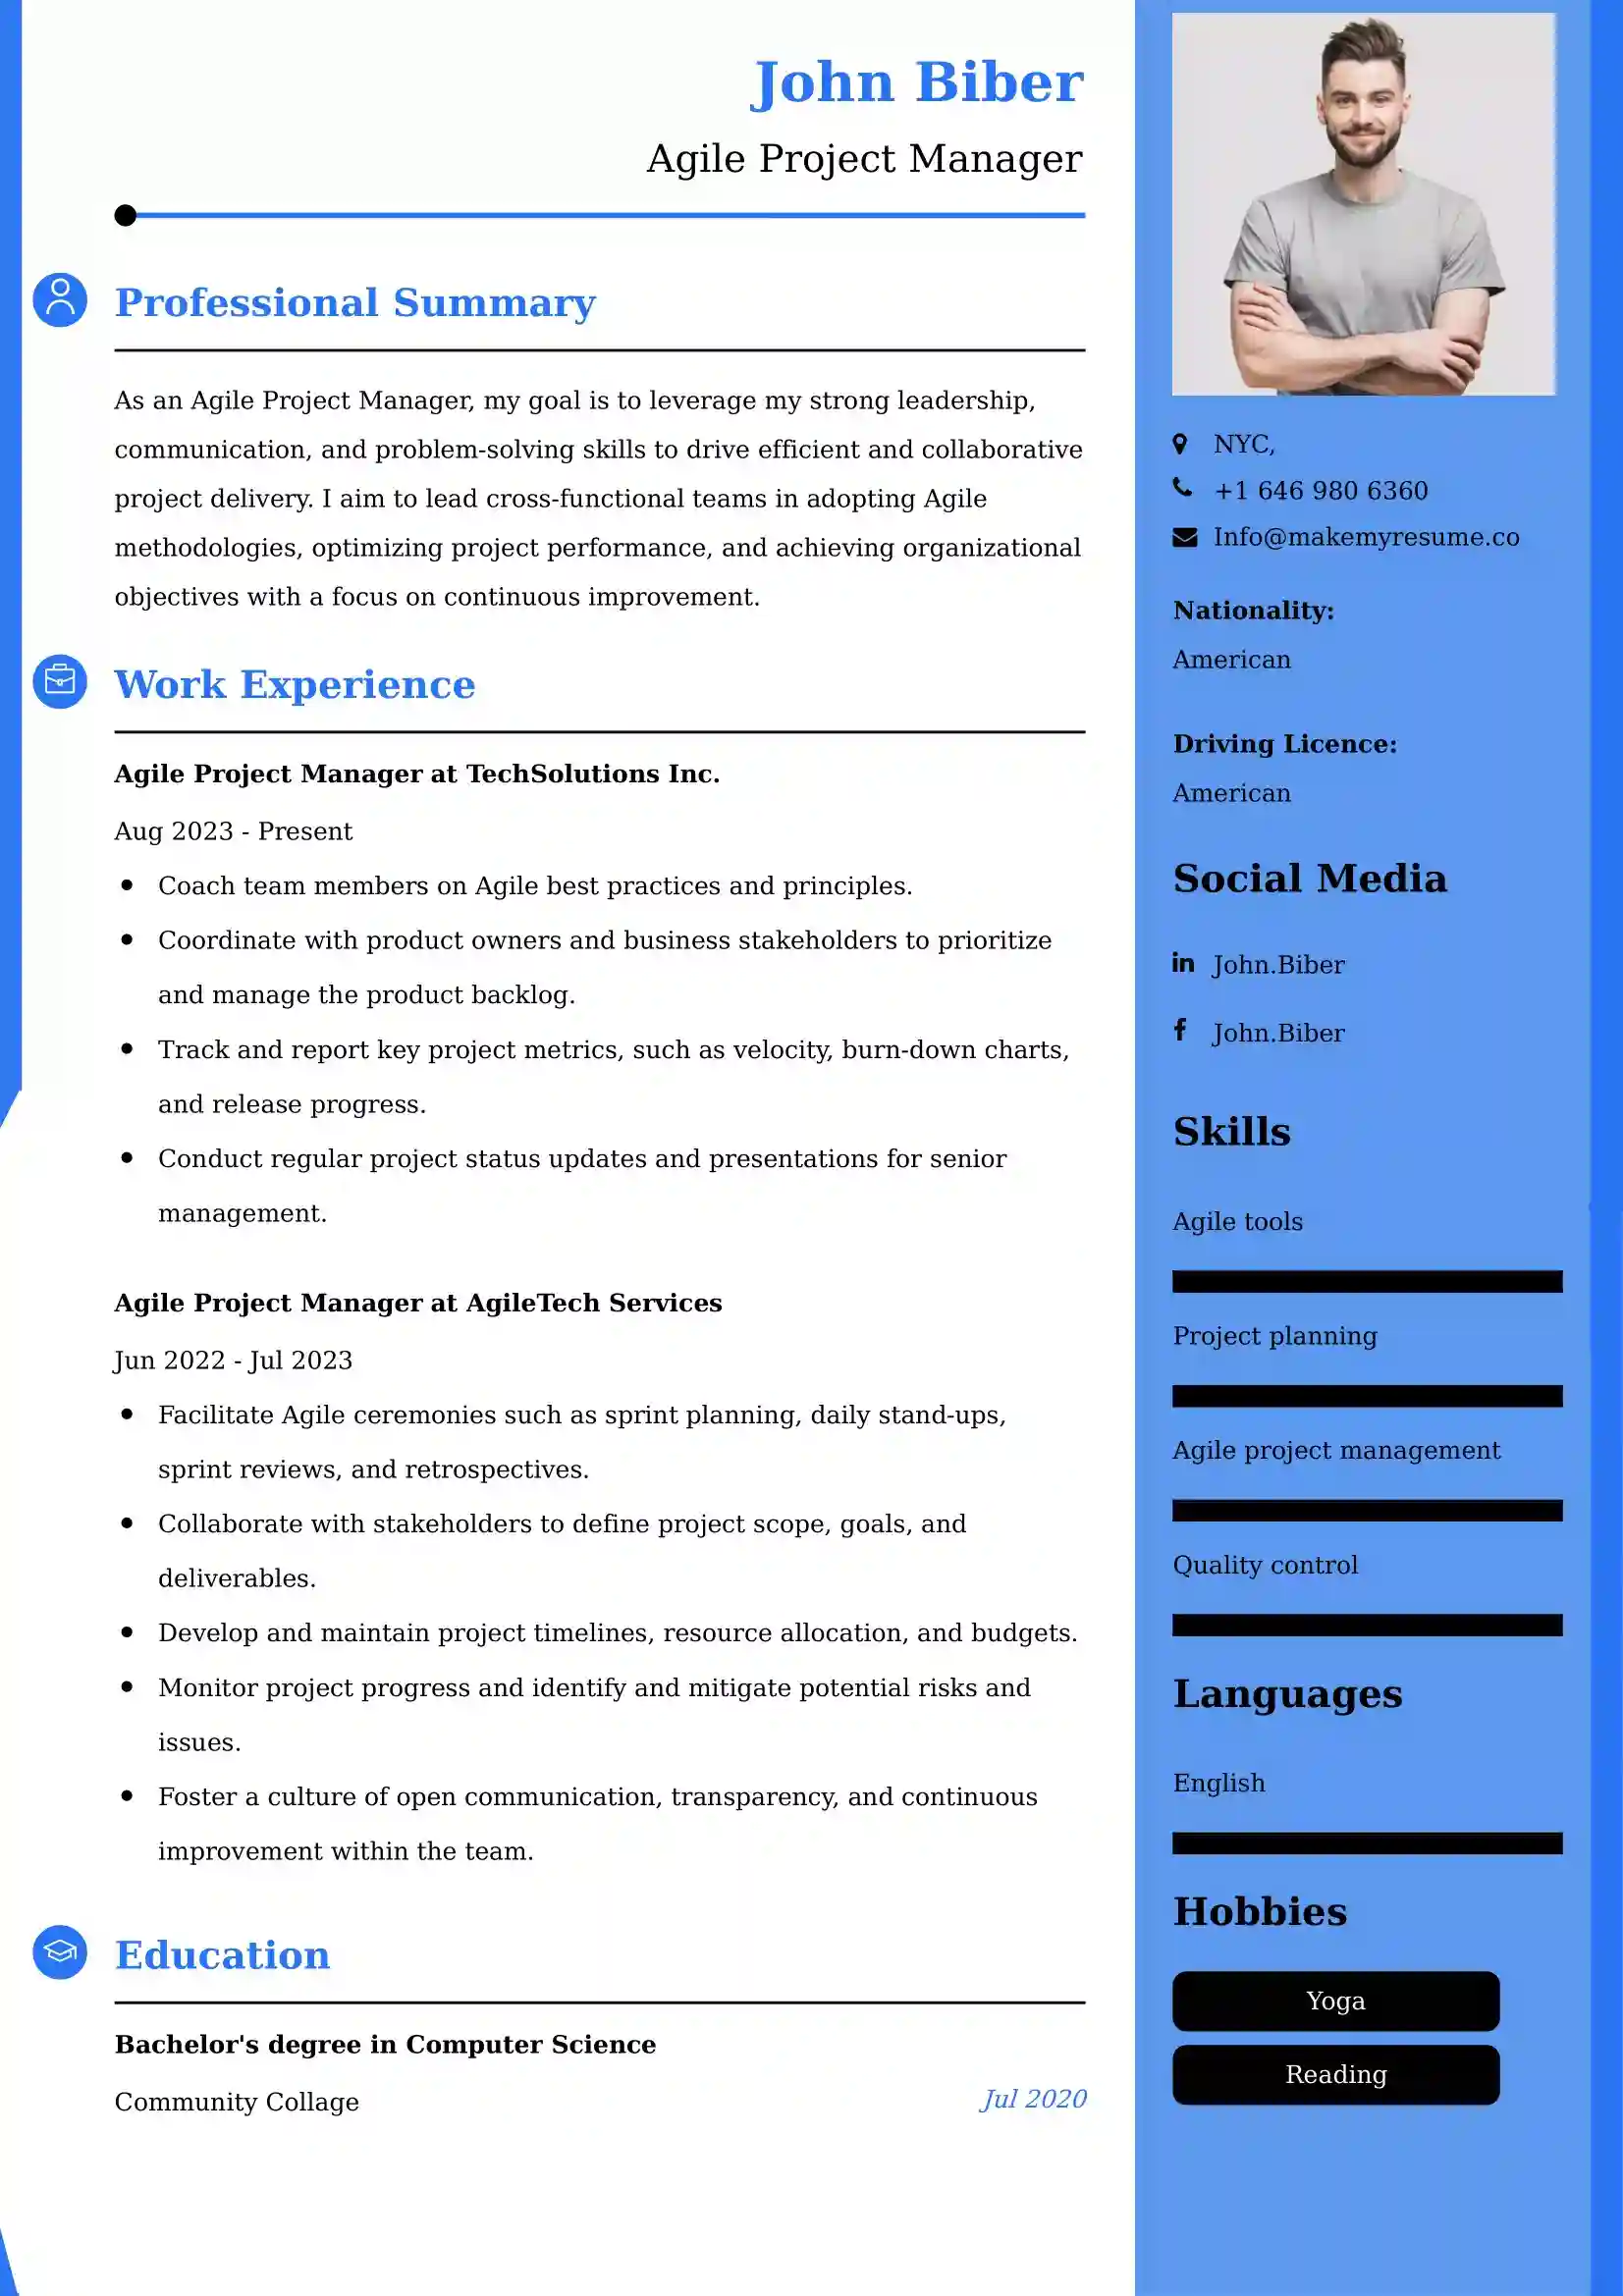 Best Agile Project Manager Resume Examples for UAE